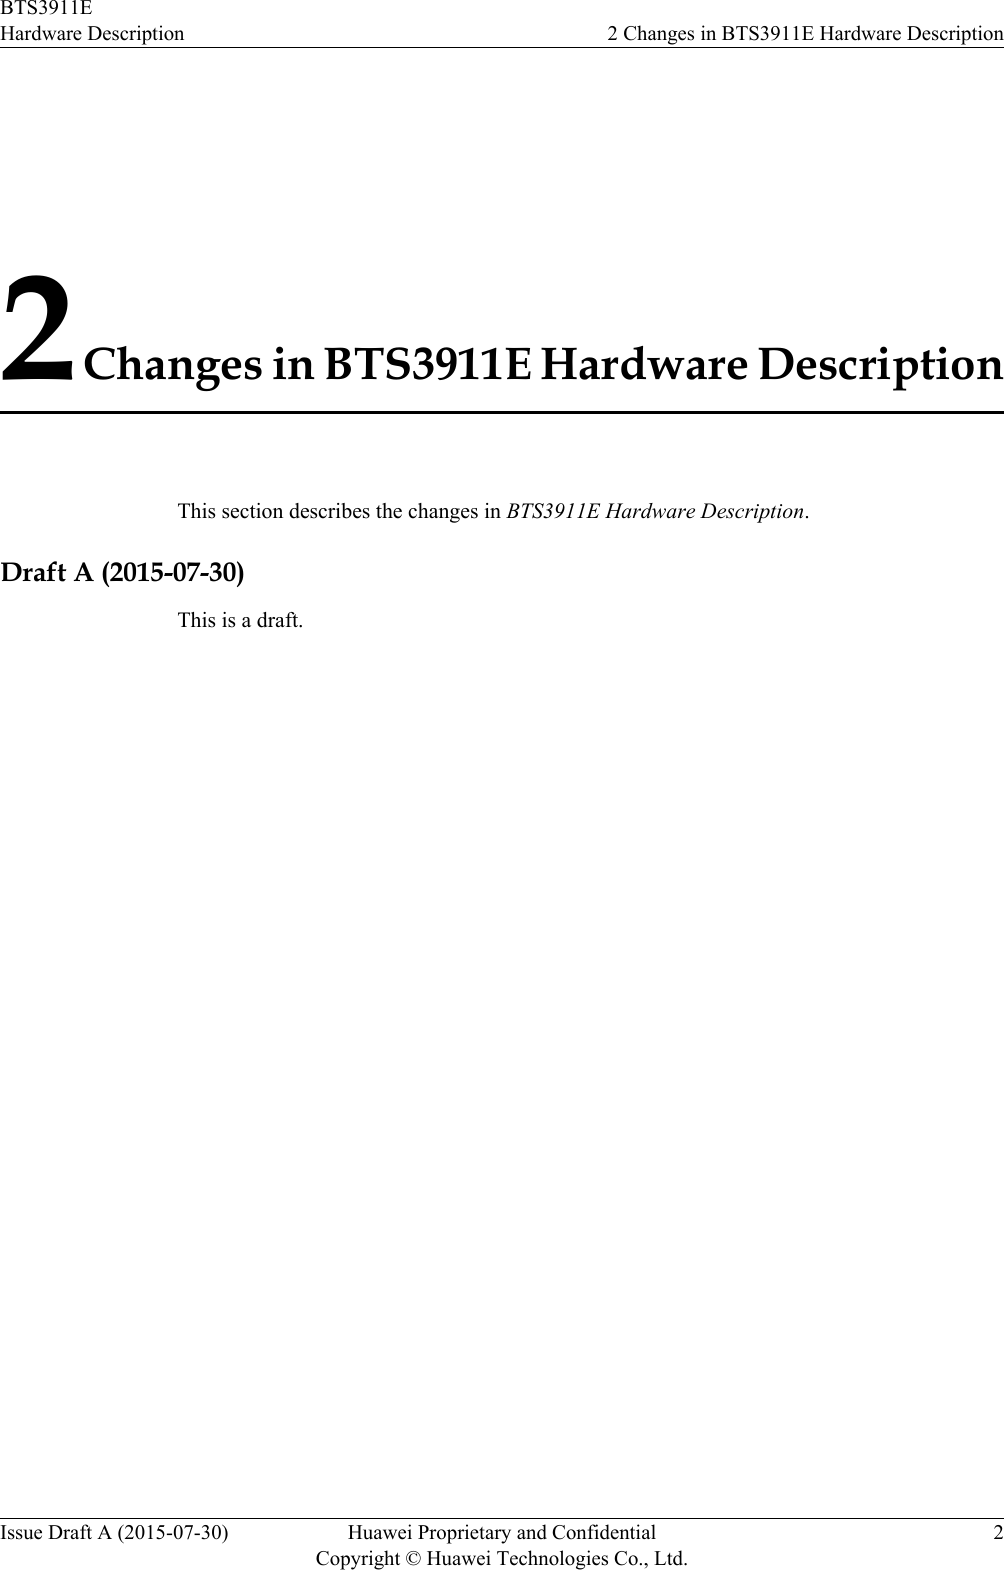 2 Changes in BTS3911E Hardware DescriptionThis section describes the changes in BTS3911E Hardware Description.Draft A (2015-07-30)This is a draft.BTS3911EHardware Description 2 Changes in BTS3911E Hardware DescriptionIssue Draft A (2015-07-30) Huawei Proprietary and ConfidentialCopyright © Huawei Technologies Co., Ltd.2